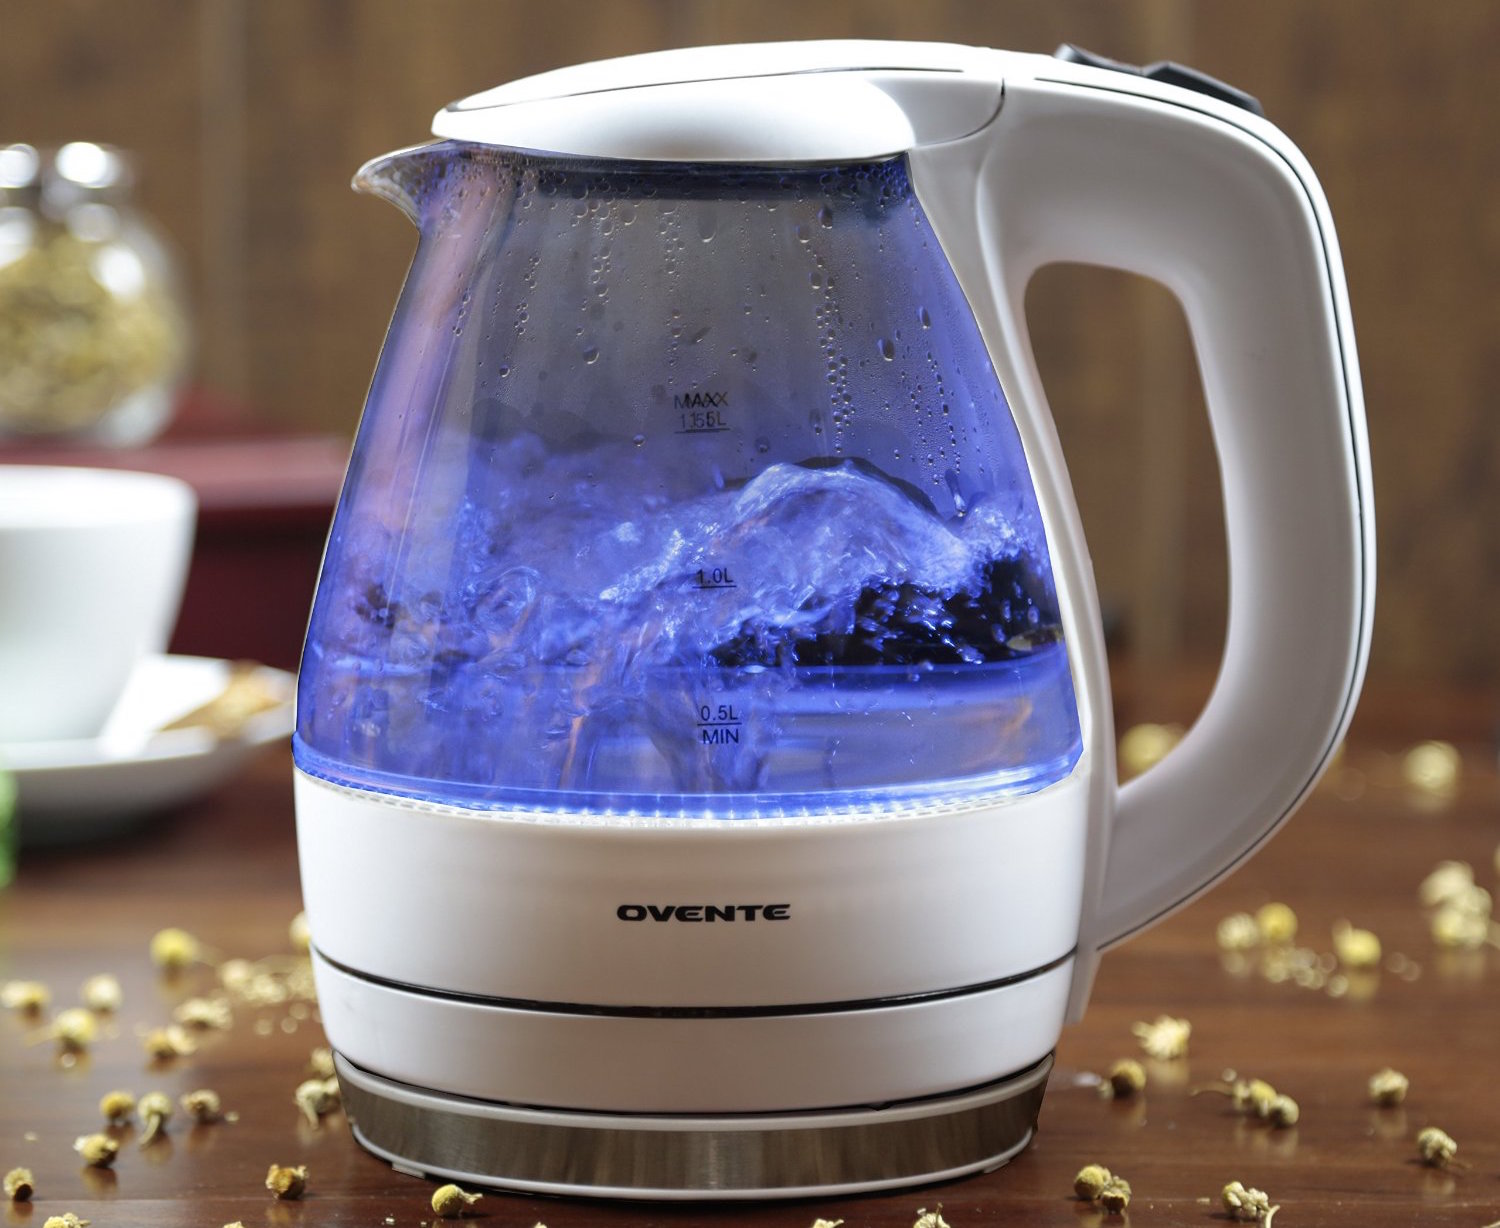 Home: Ovente glass electric kettle $24 (Orig. $30), more